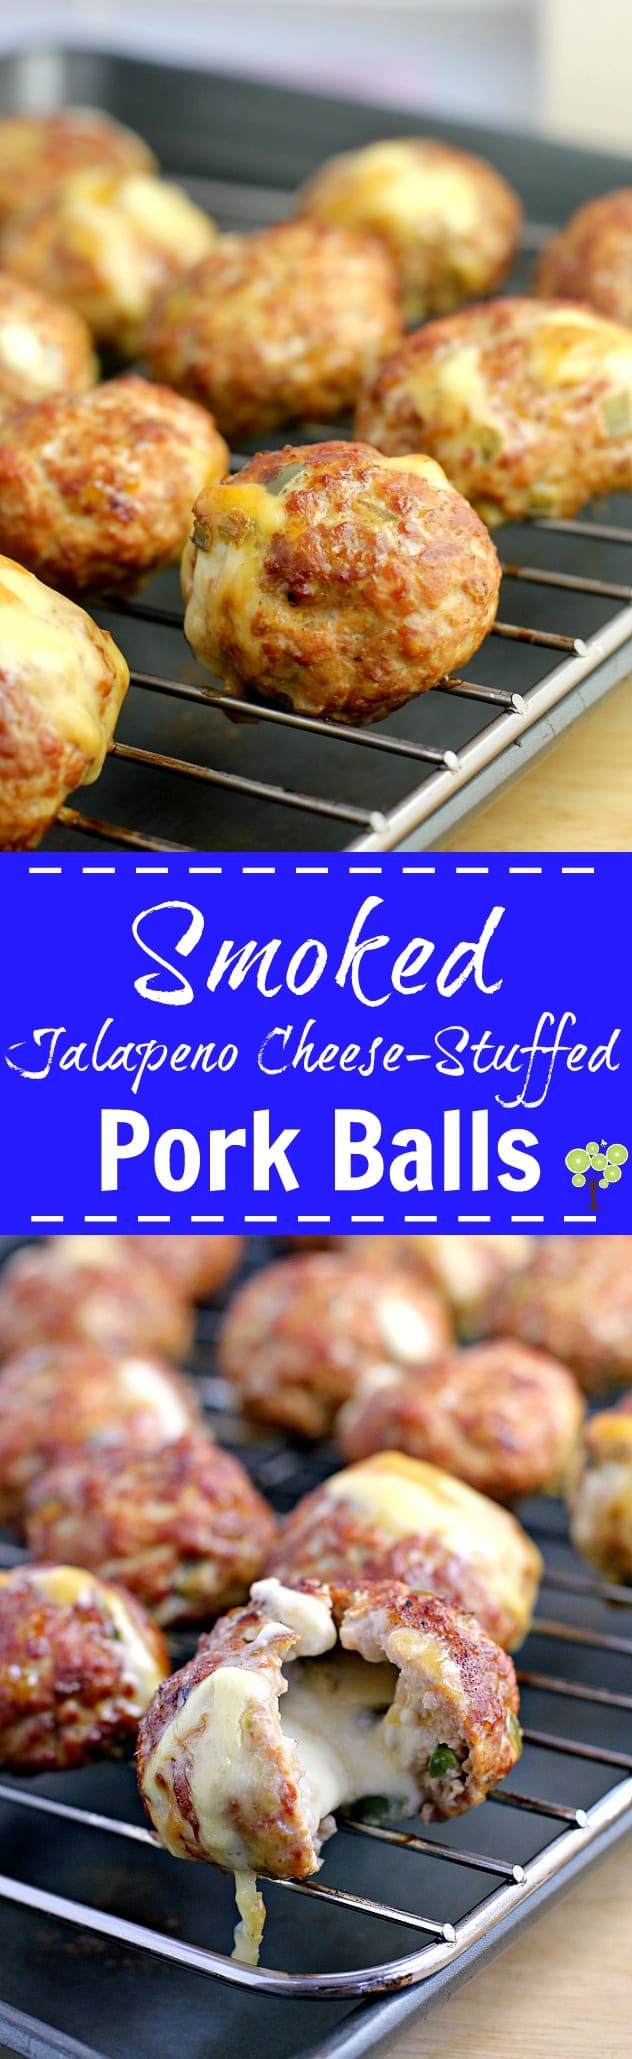 Smoked Jalapeno Cheese-Stuffed Pork Balls, perfect for any grilling, smoking holiday http://wp.me/p4qC4h-31o